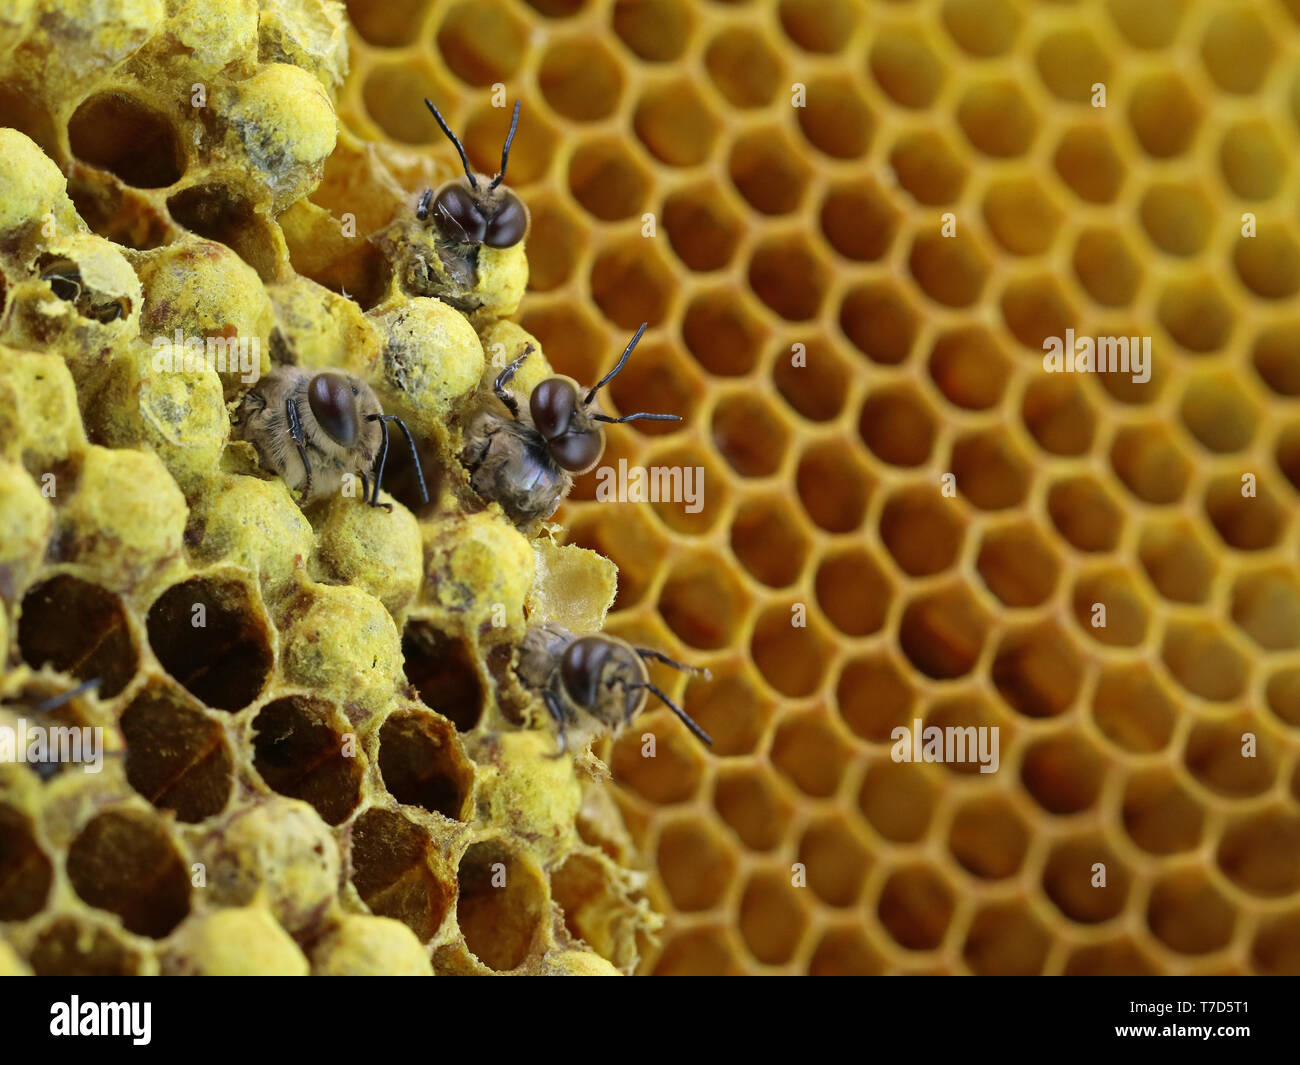 close up of a bees hatching from a honeycomb with copy space Stock Photo